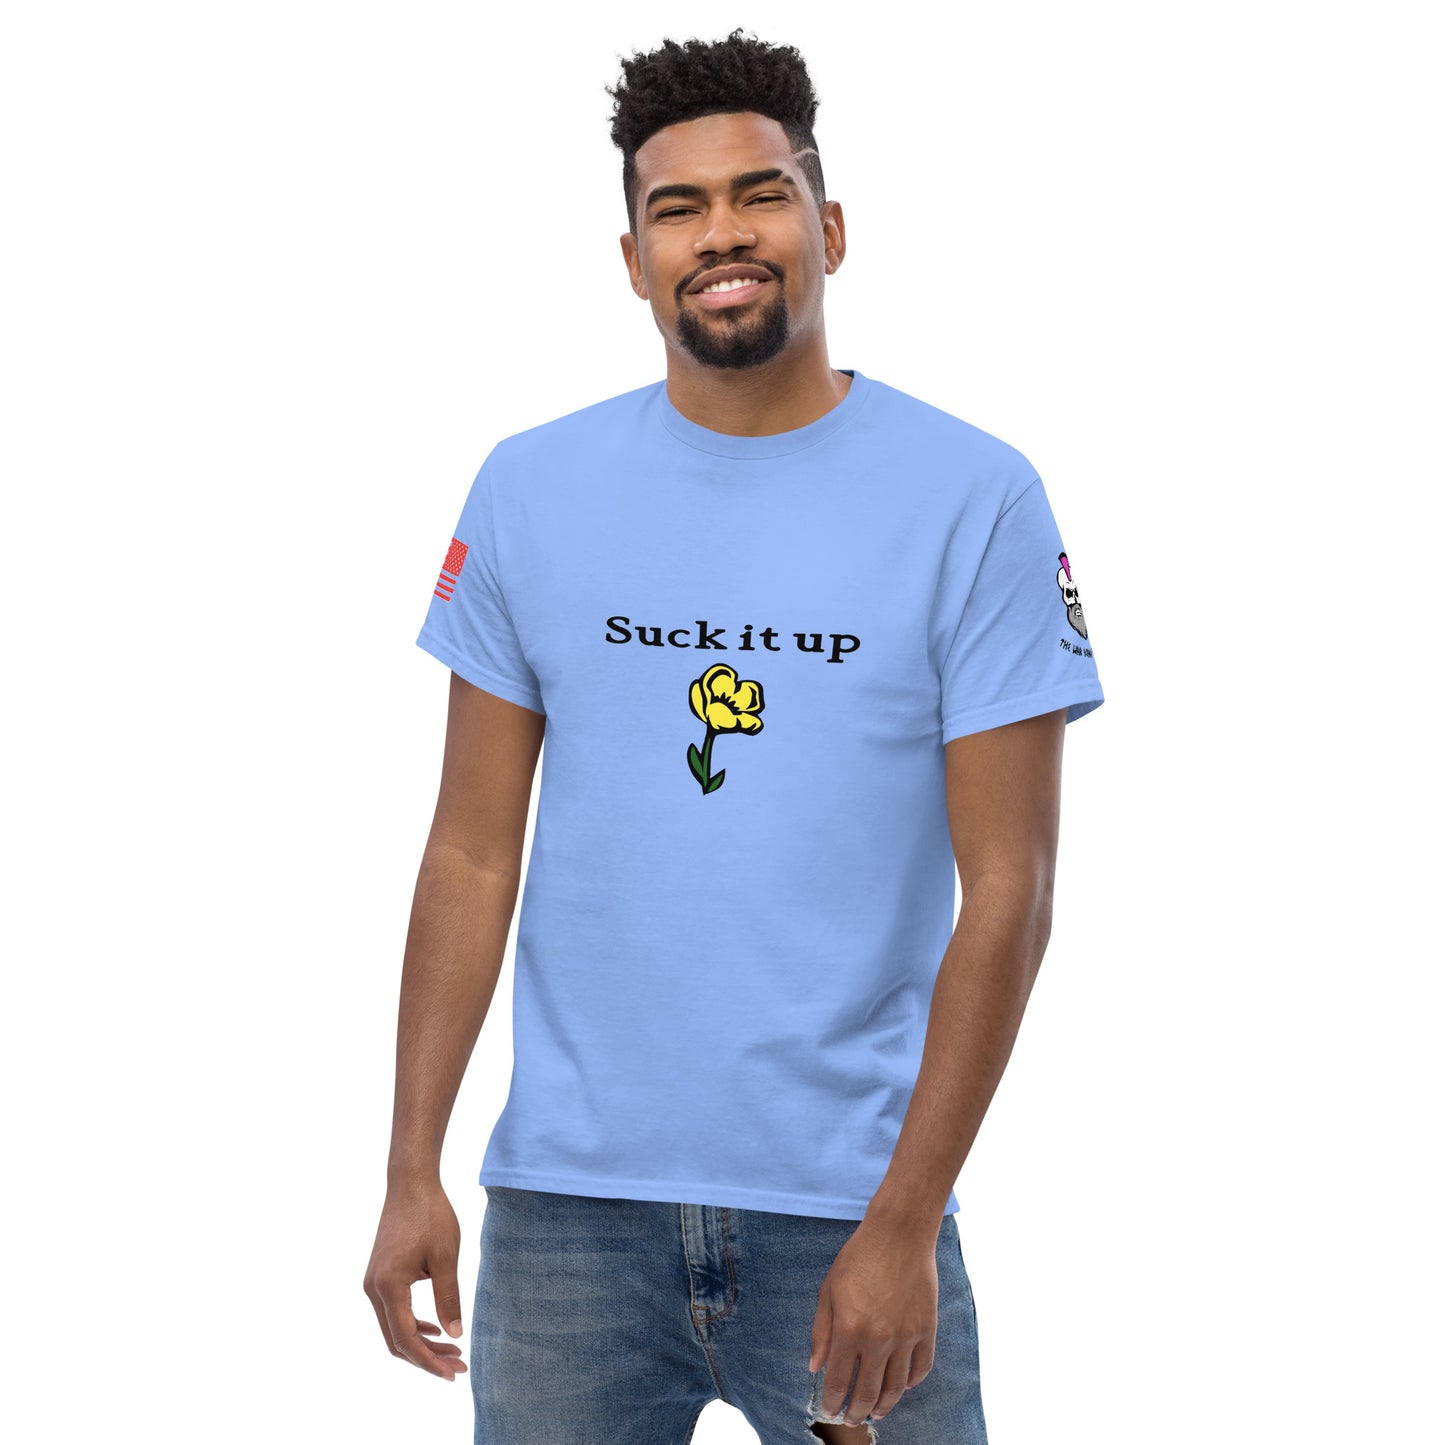 Buttercup classic tee